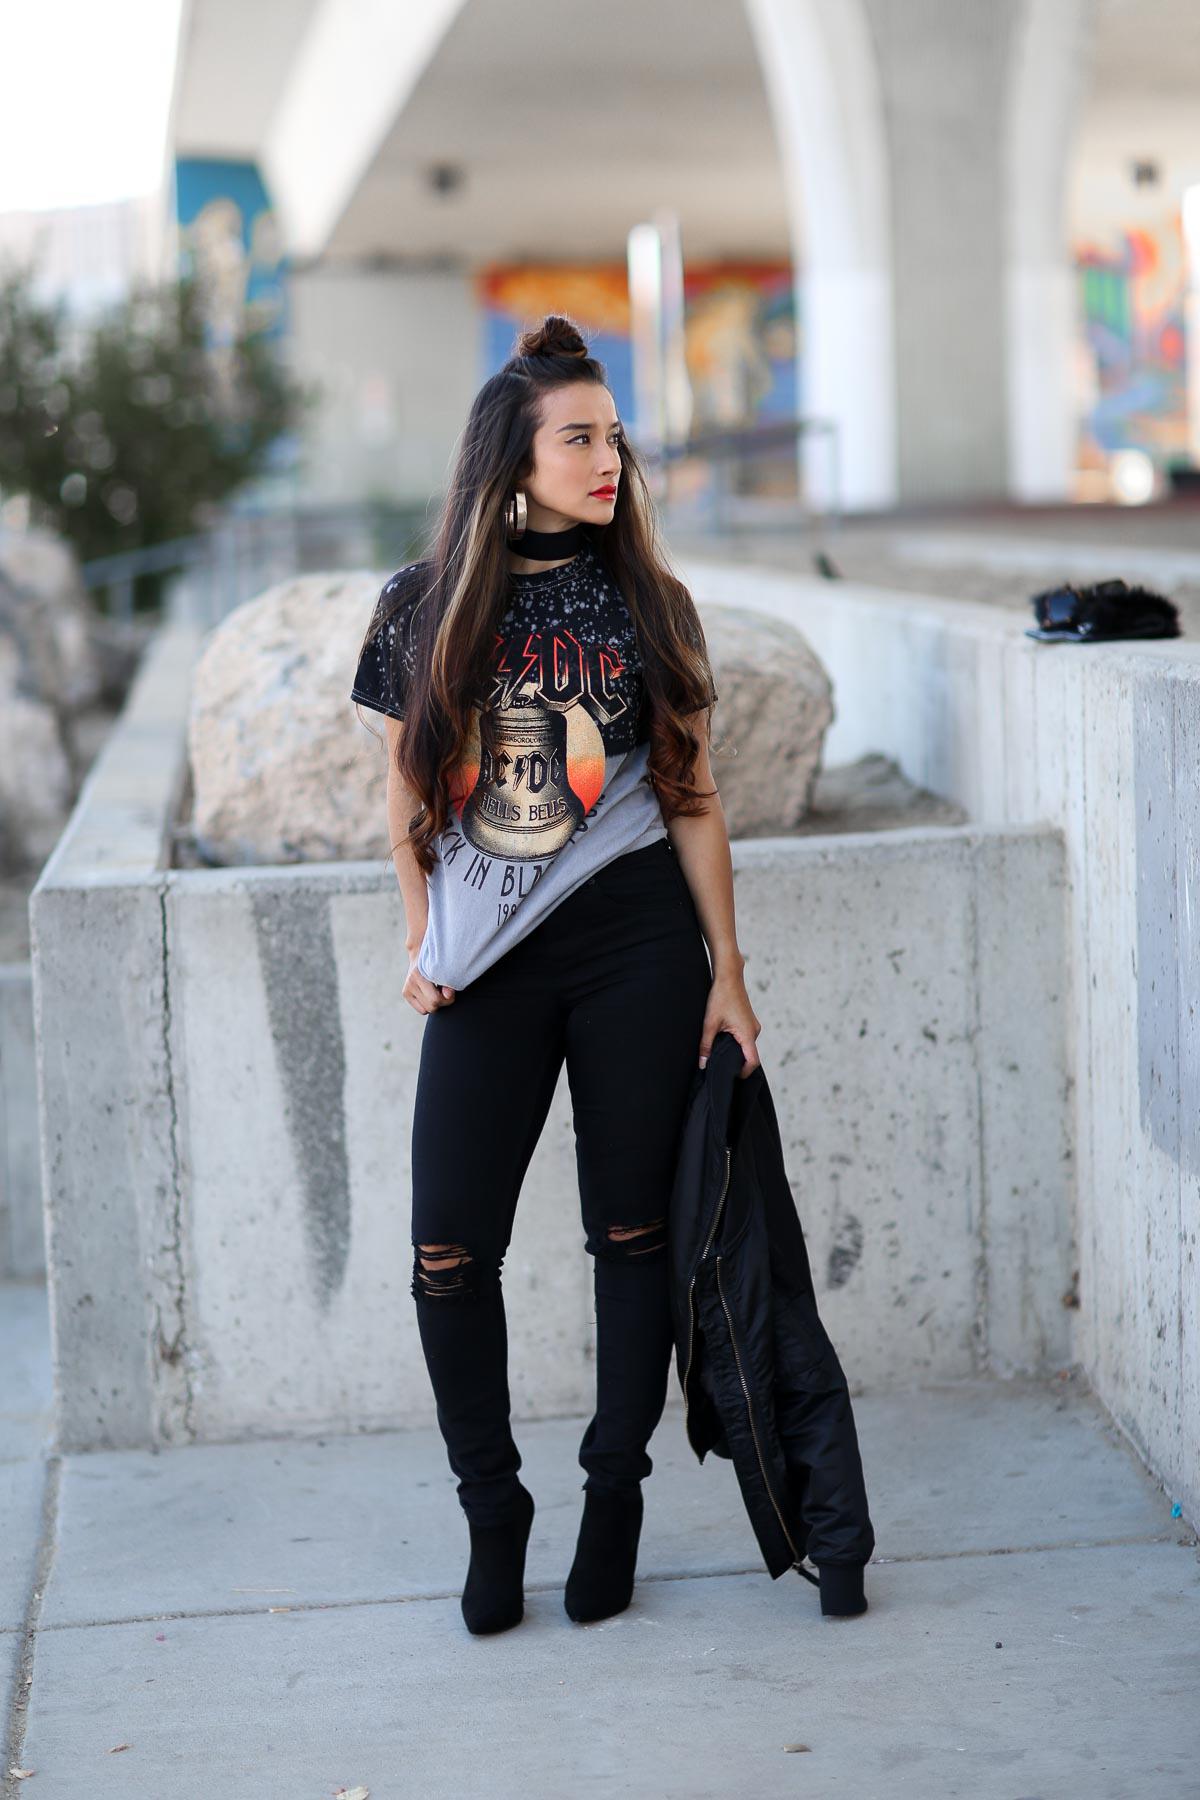 stiletto-confessions-forever-21-graphic-acdc-tee-shirt-44